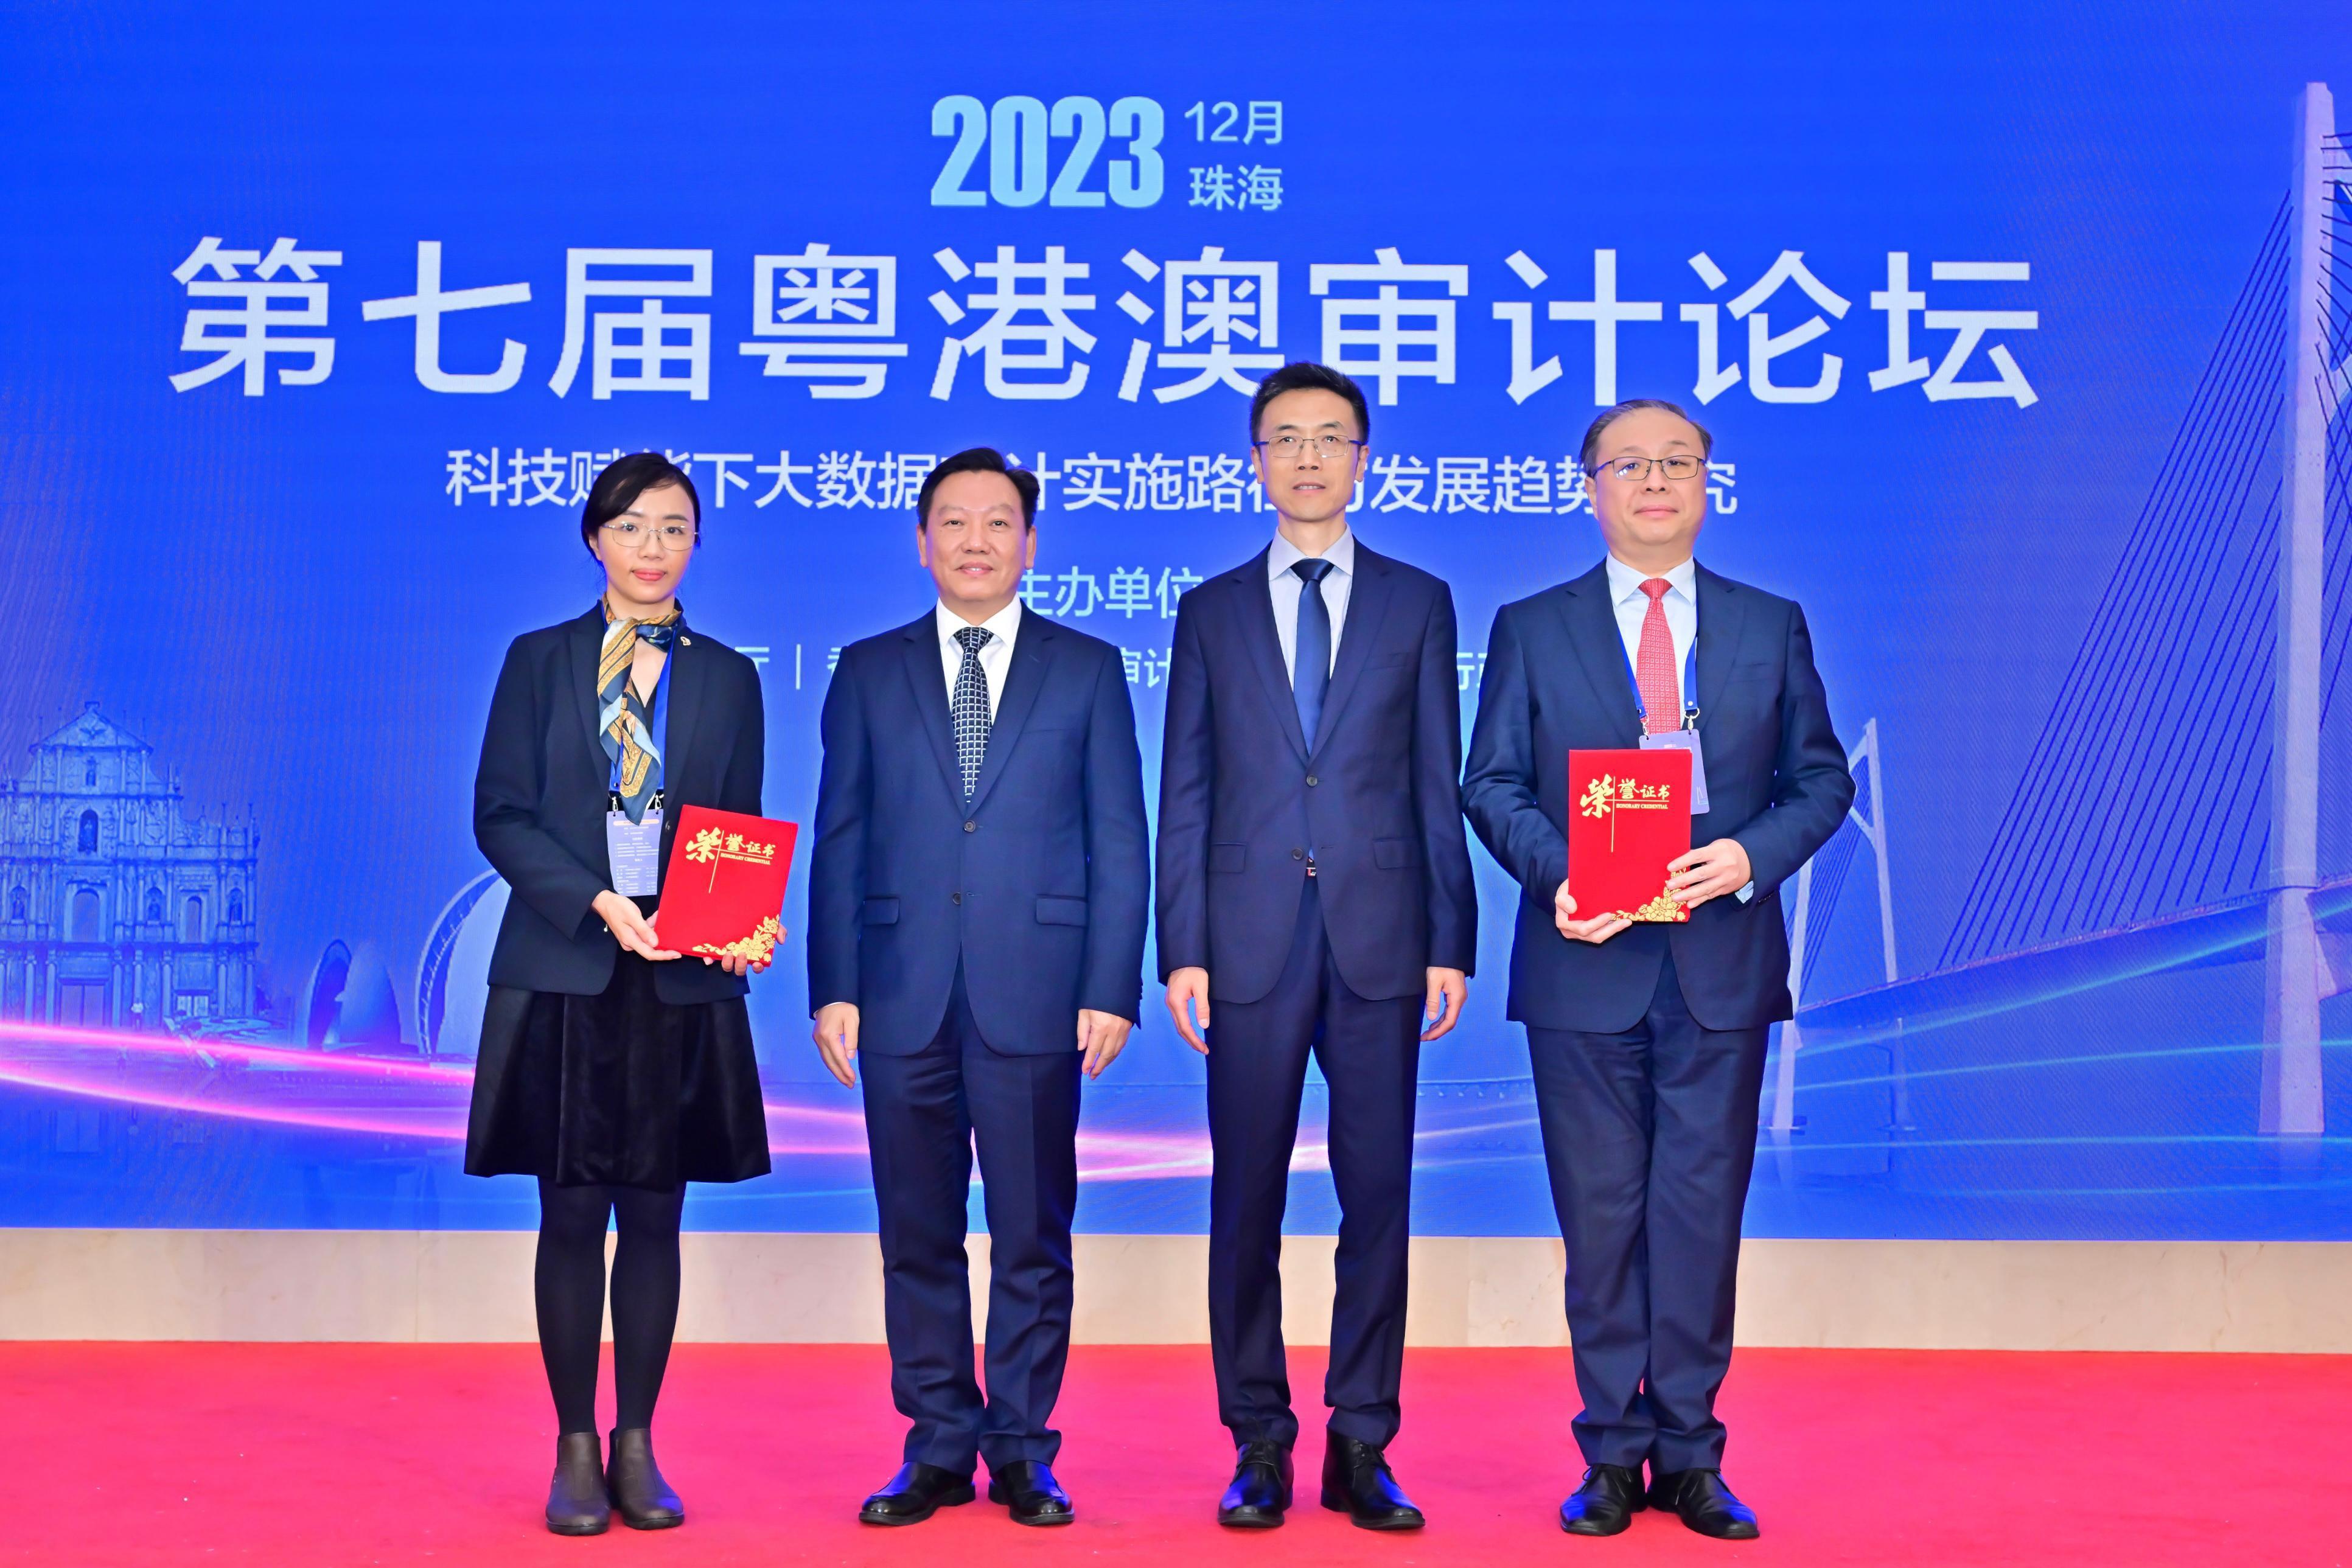 The 7th Guangdong-Hong Kong-Macao Audit Conference 2023 was held December 6 to 8 in Zhuhai. Photo shows Auditor of the Audit Commission Ms Rebecca Ma (first left), who briefed the participants of the conference on the Audit Commission’s work of applying big data technology in auditing work in Hong Kong. Her report was awarded a special prize in the writing event of the conference. 